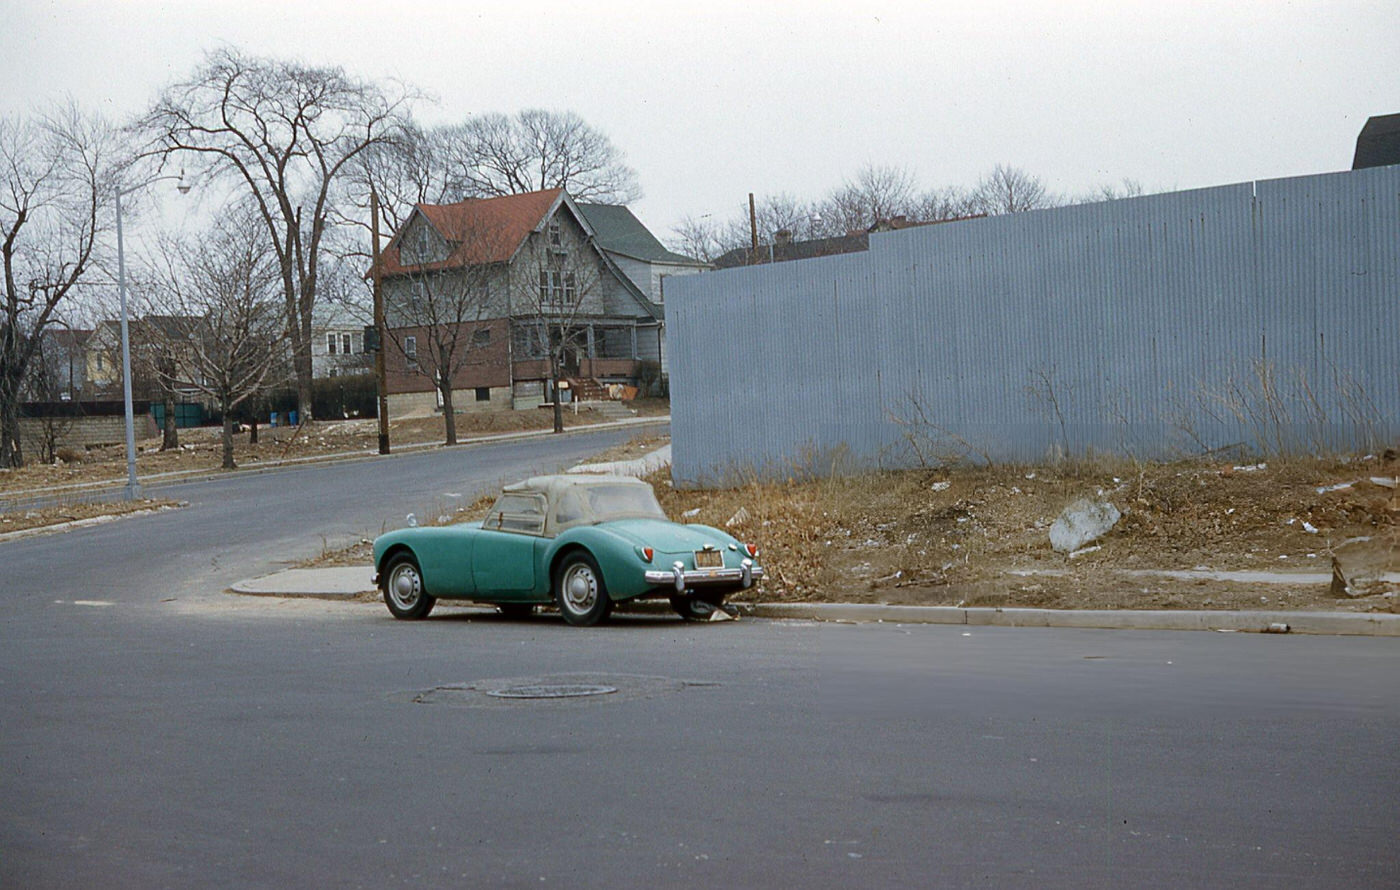 A Parked Vehicle At The Intersection Of 37Th Avenue And 112Th Street, Corona, Queens, 1960.